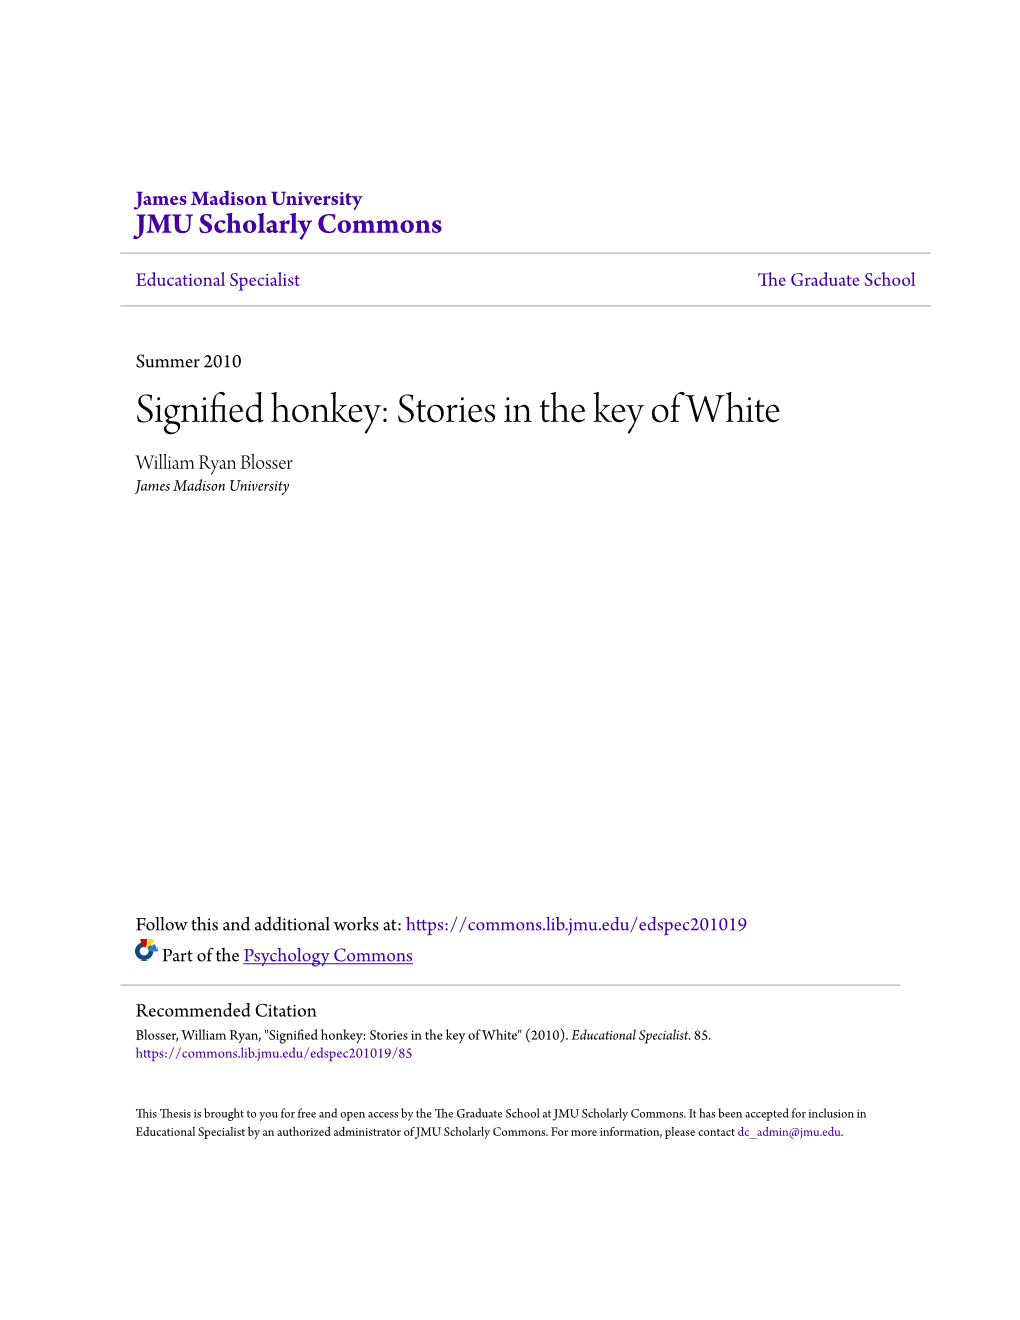 Signified Honkey: Stories in the Key of White William Ryan Blosser James Madison University